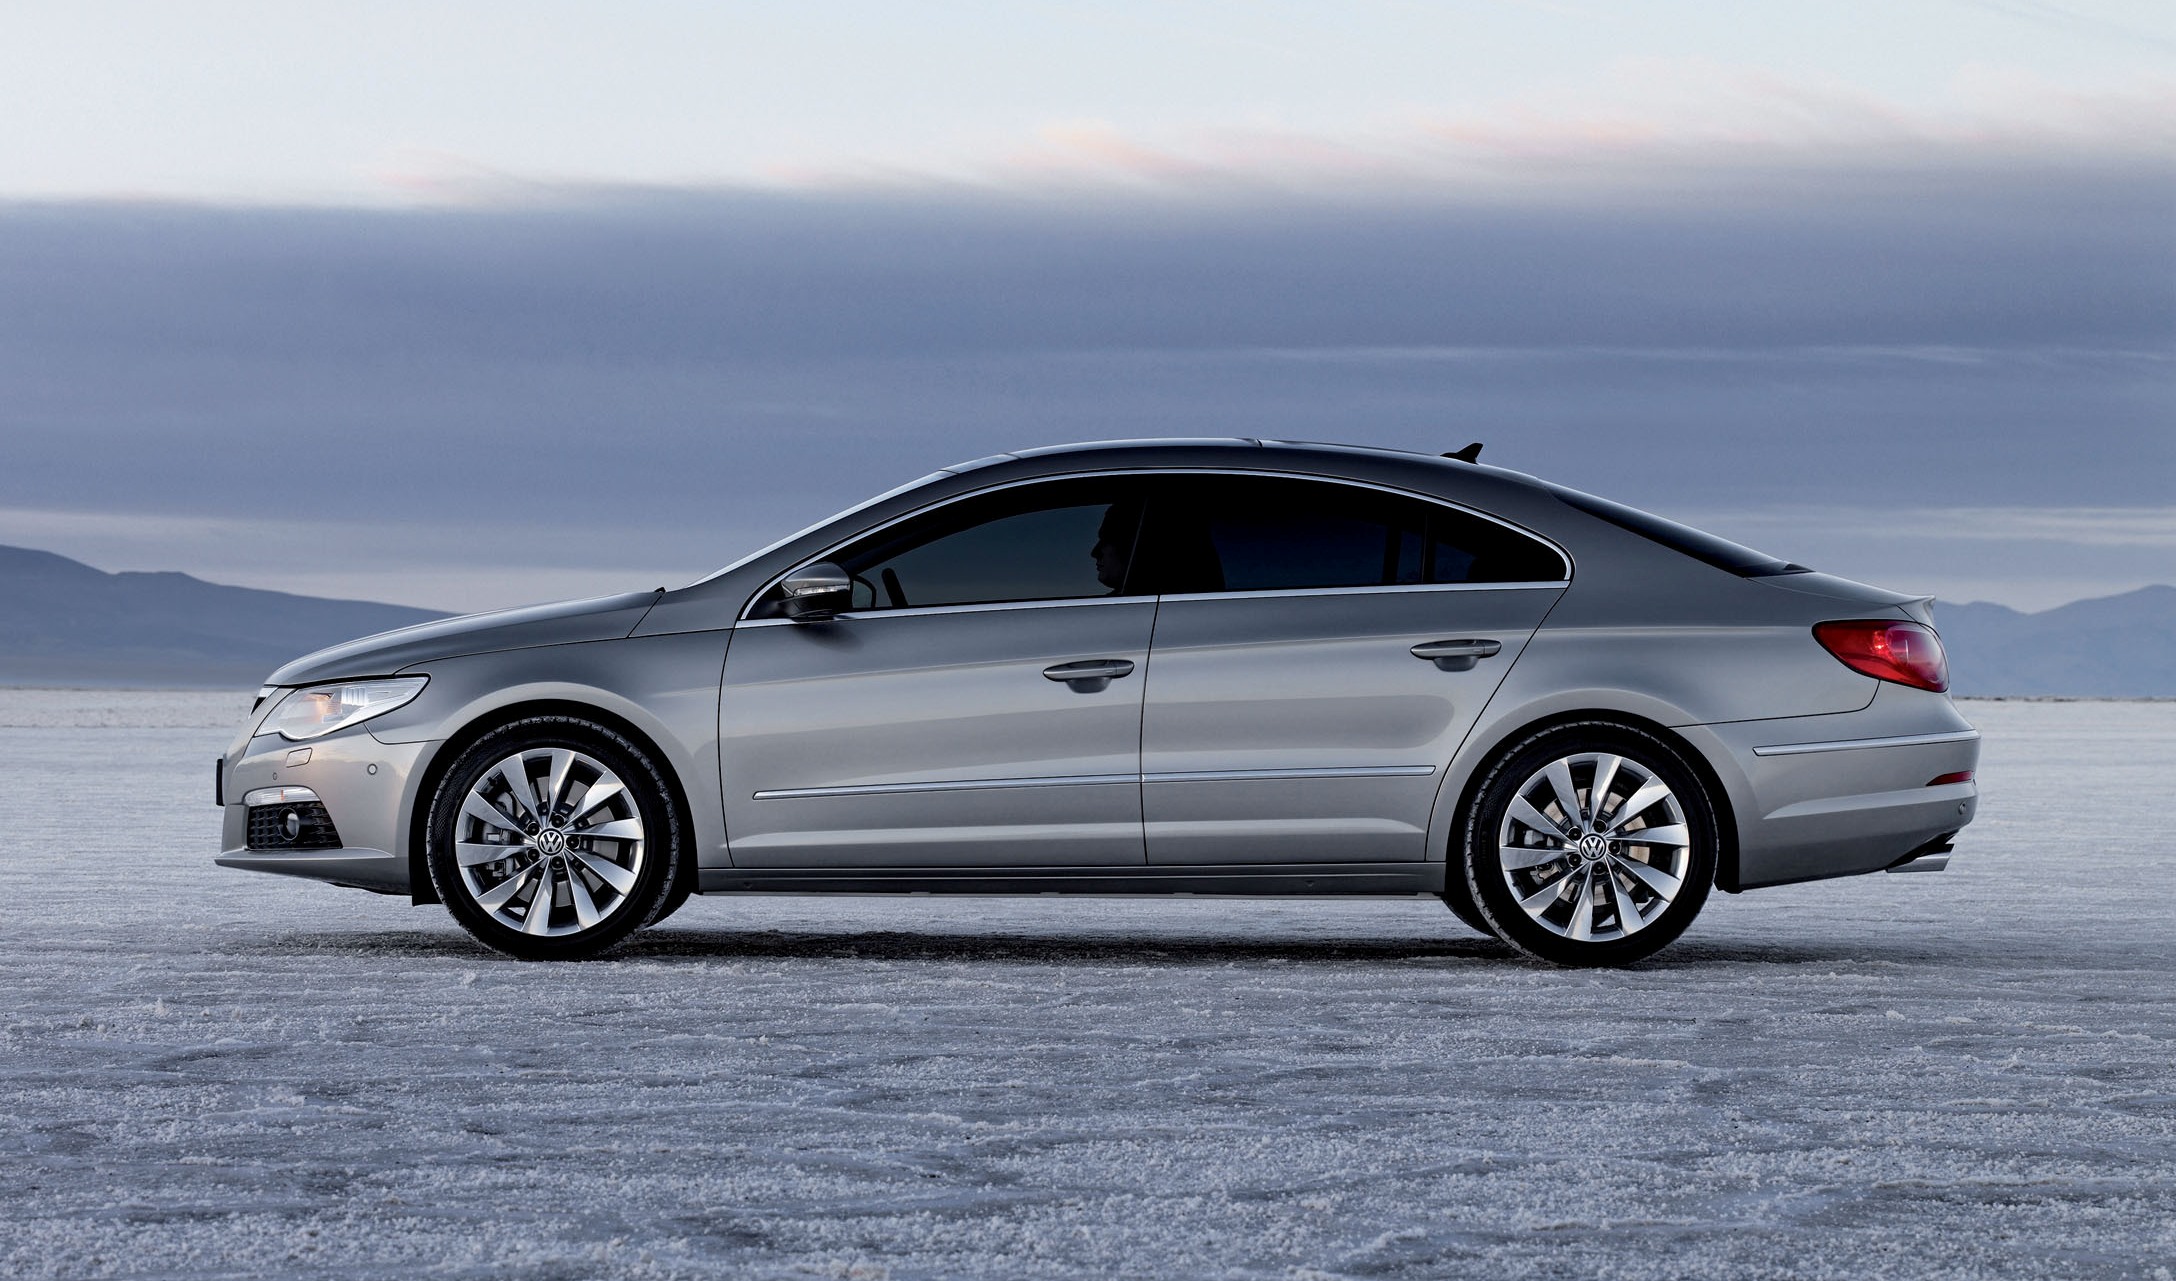 Volkswagen CC Wallpapers High Quality Download Free